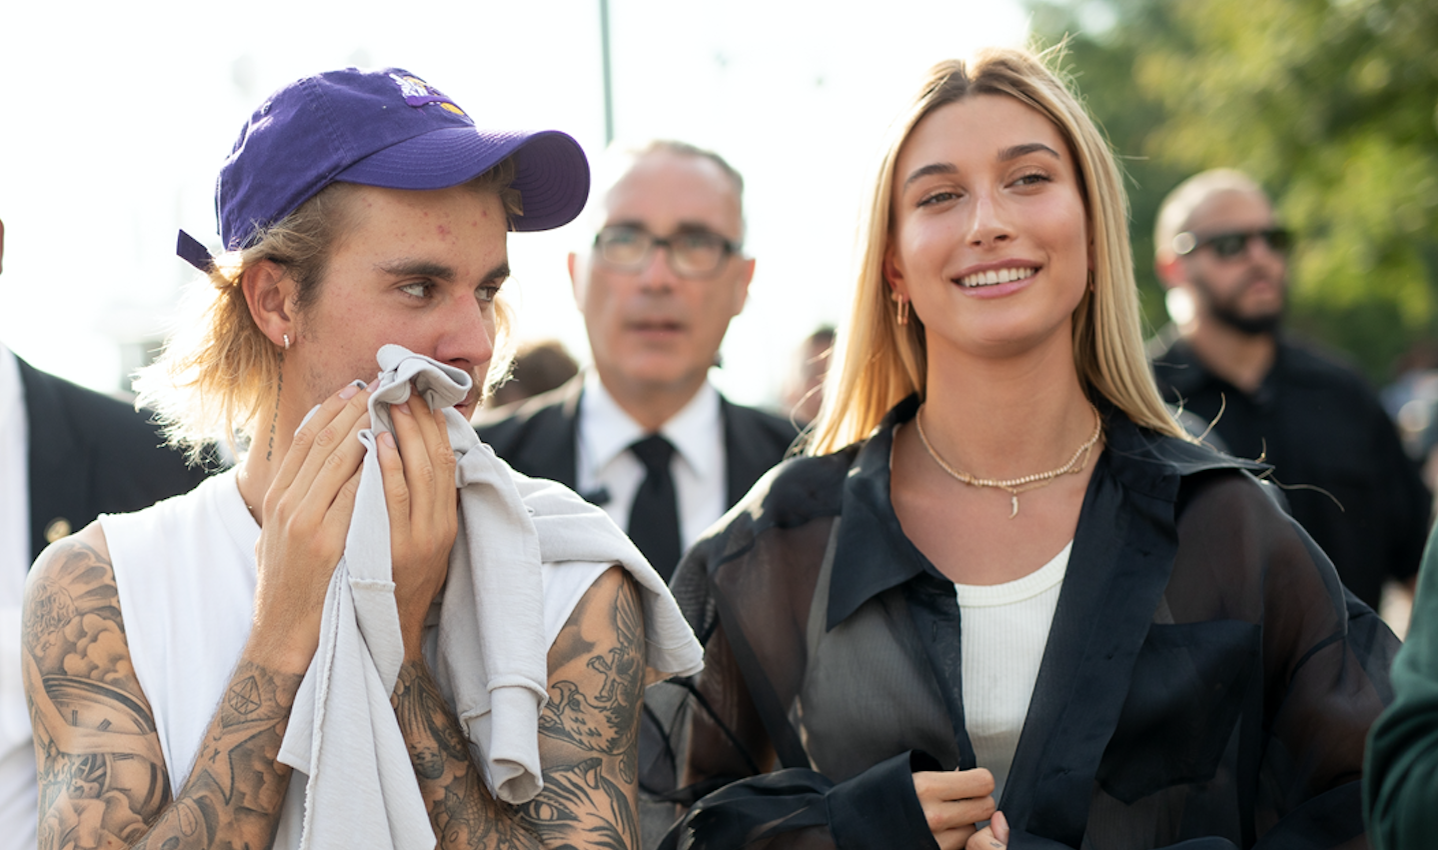 Did Justin Bieber And Hailey Baldwin Get Married In Secret